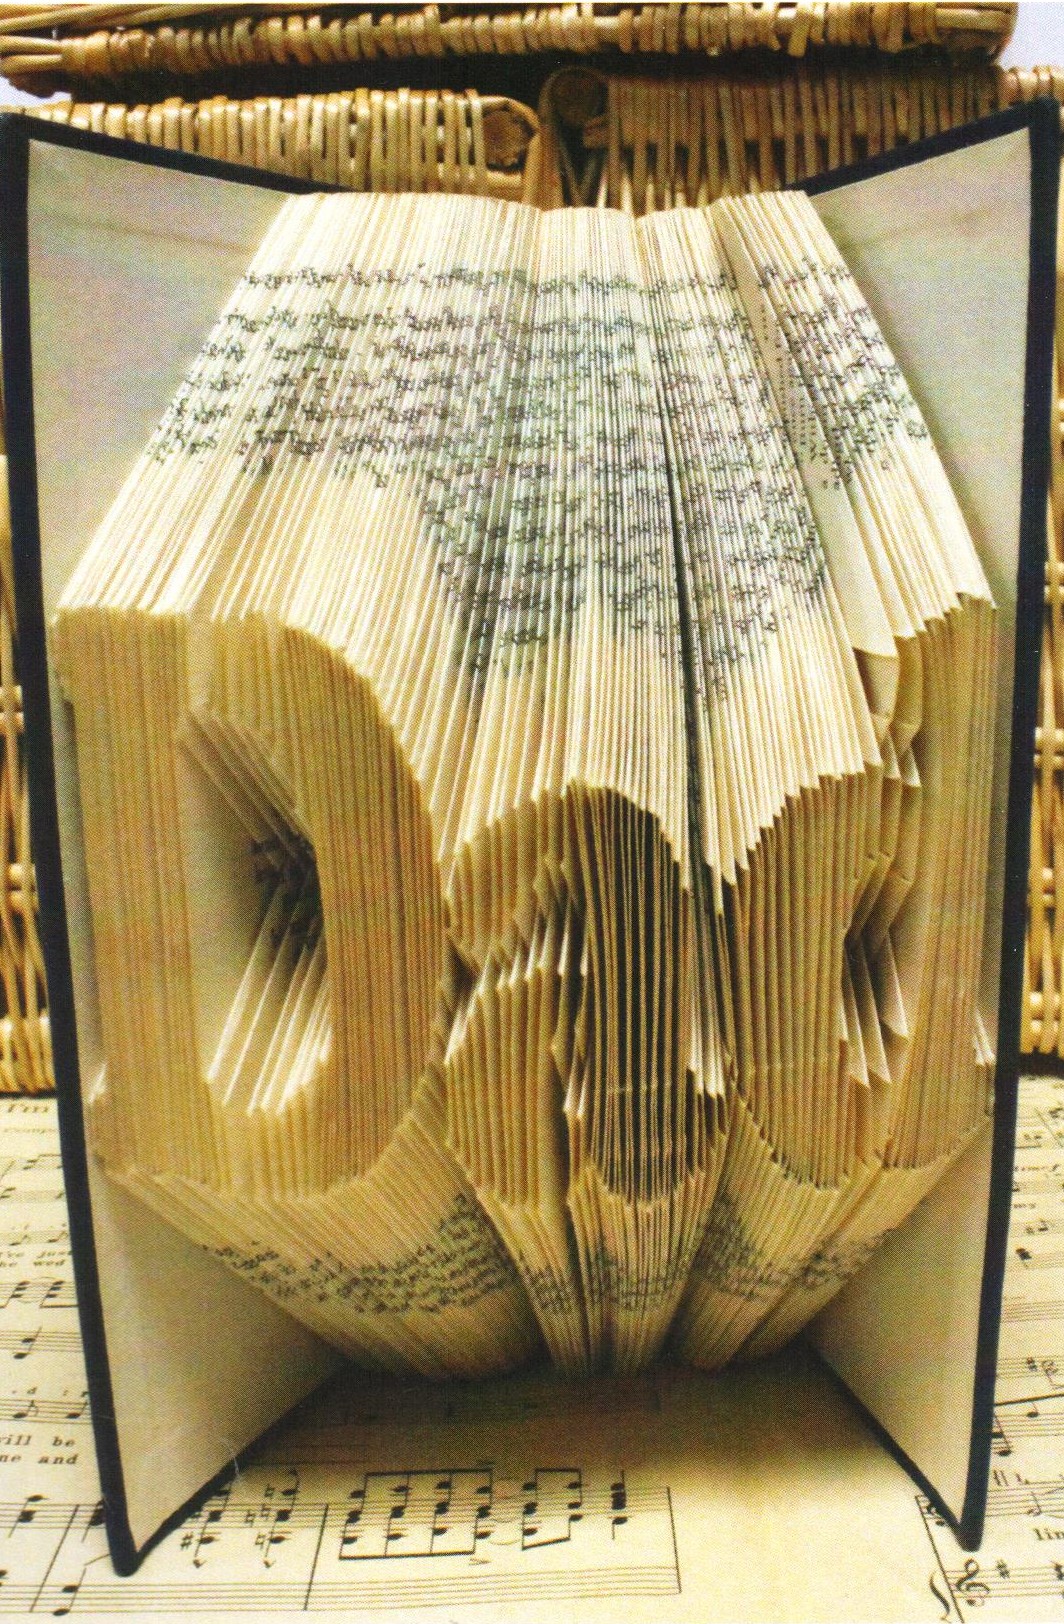 Folding Books - Upcycling Old Books, Easy to Do - Debbi Moore Designs